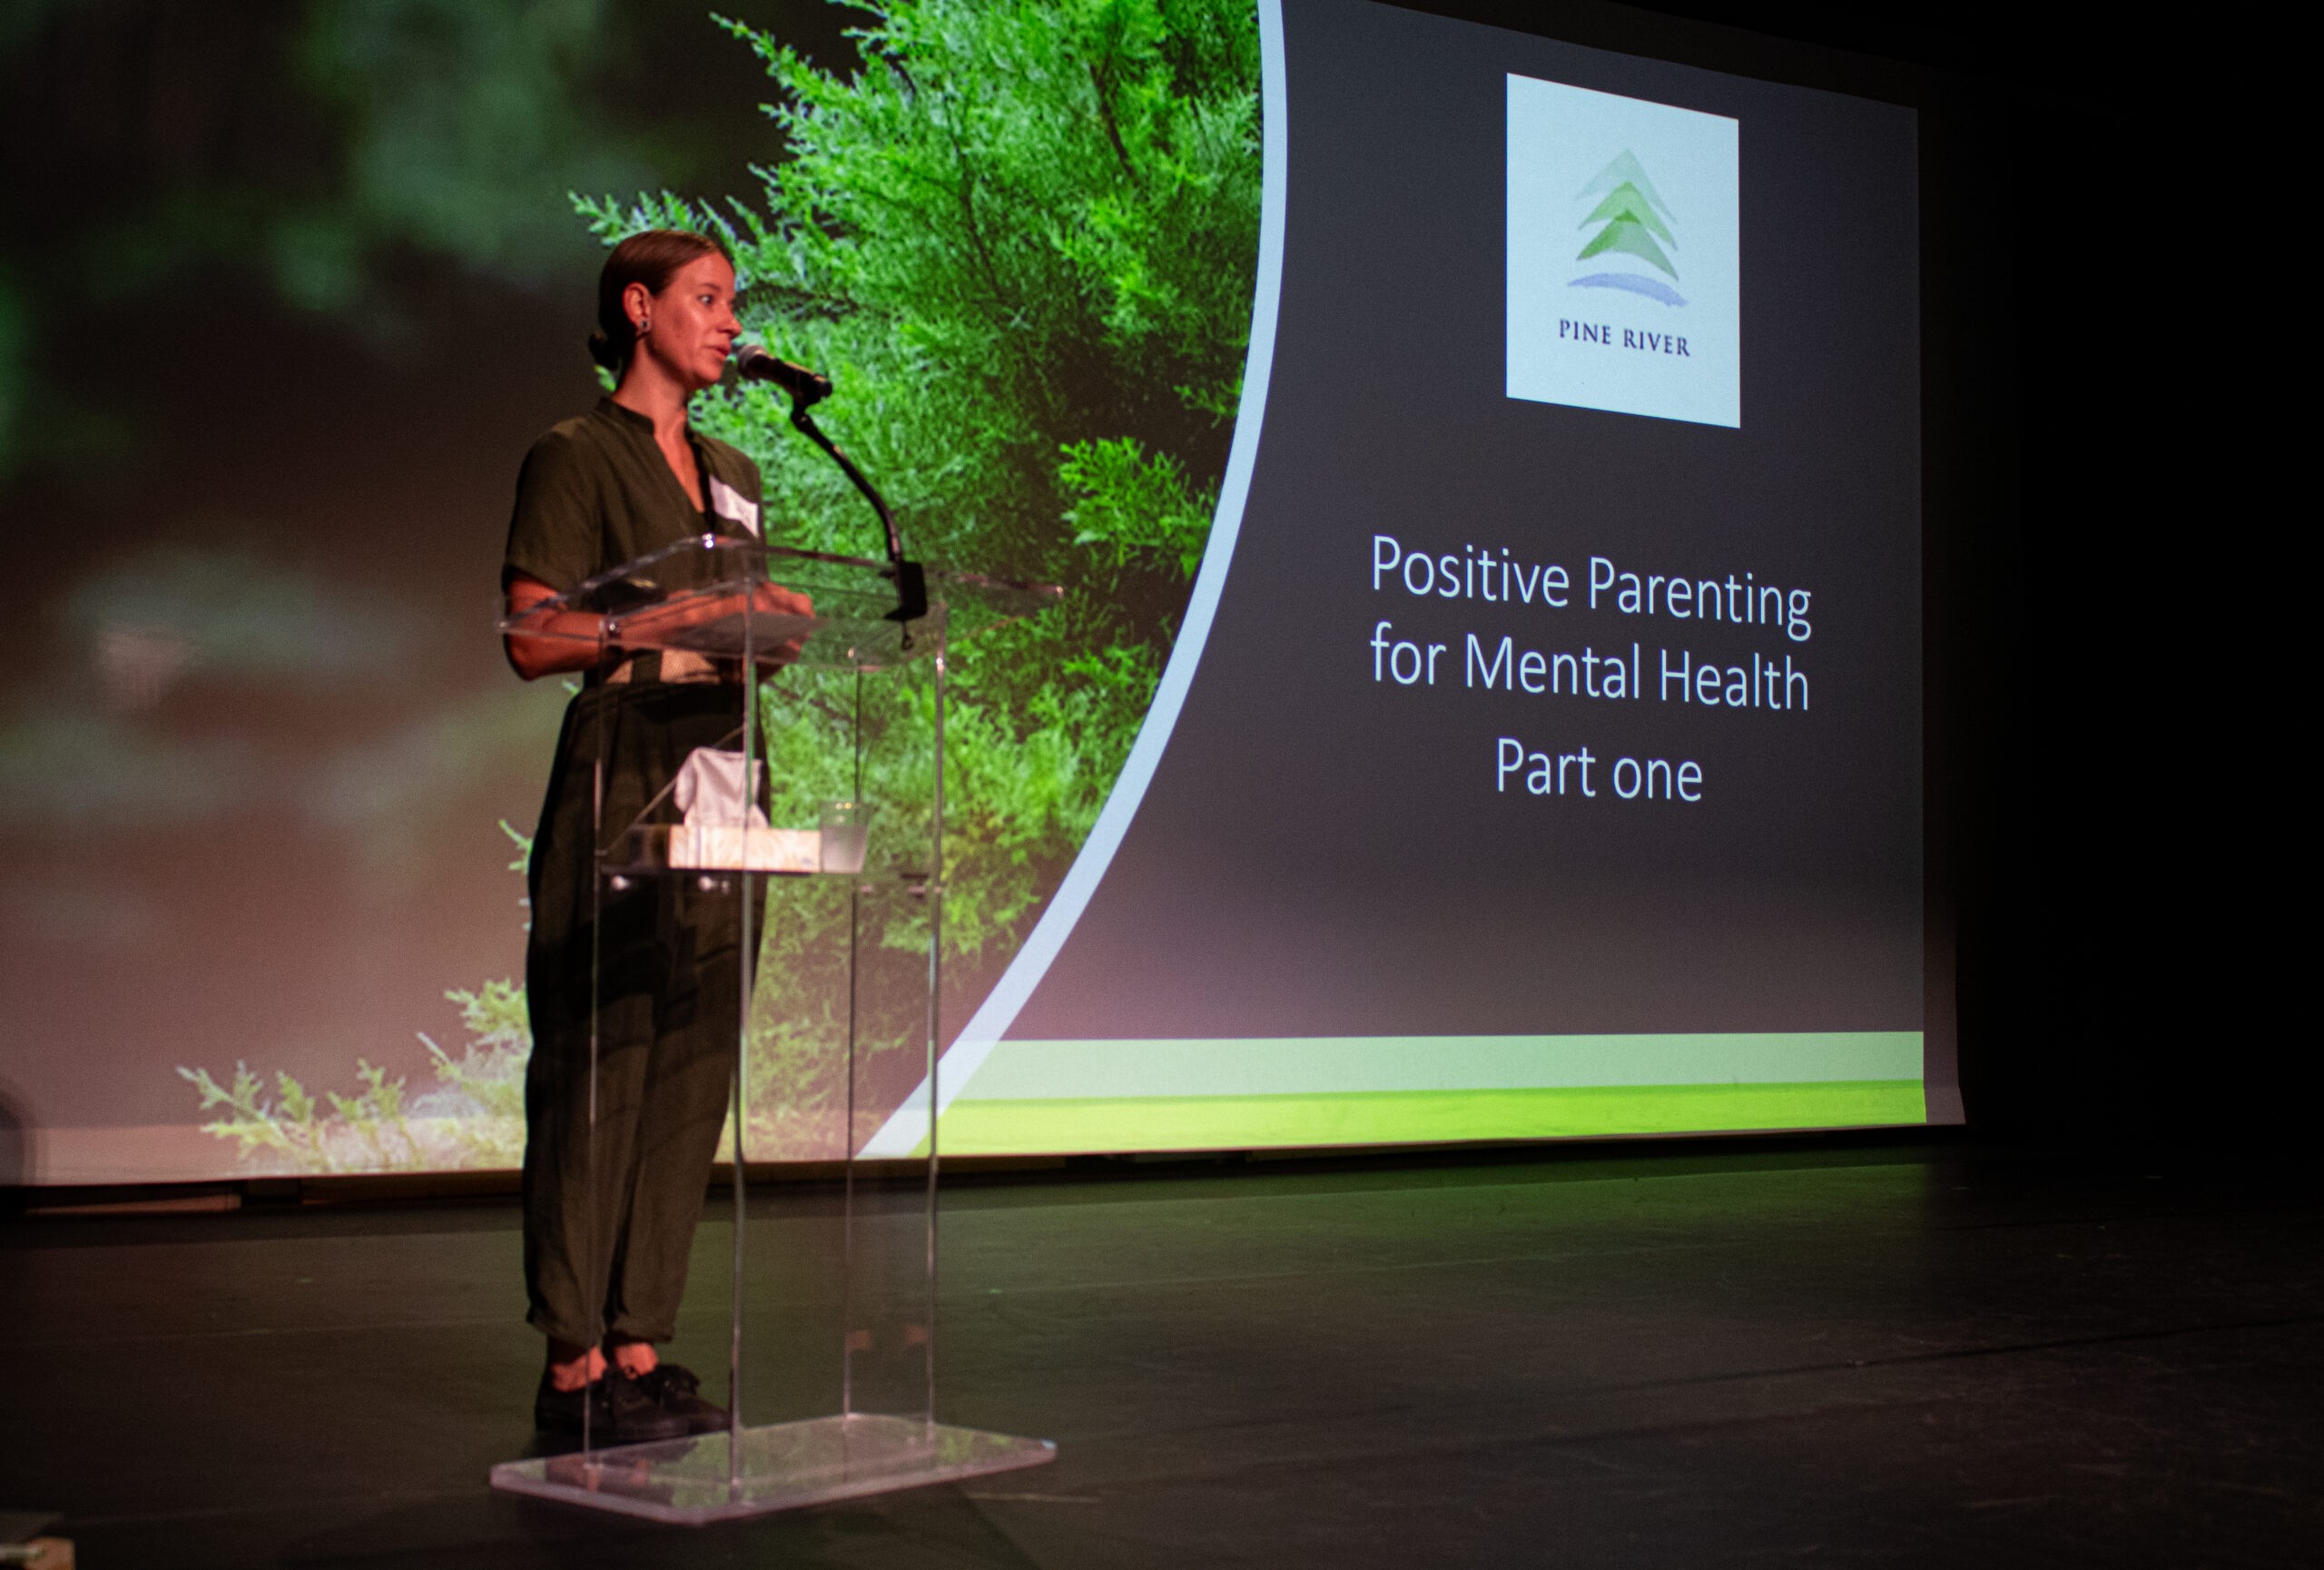 Amanda talking about the positive parenting